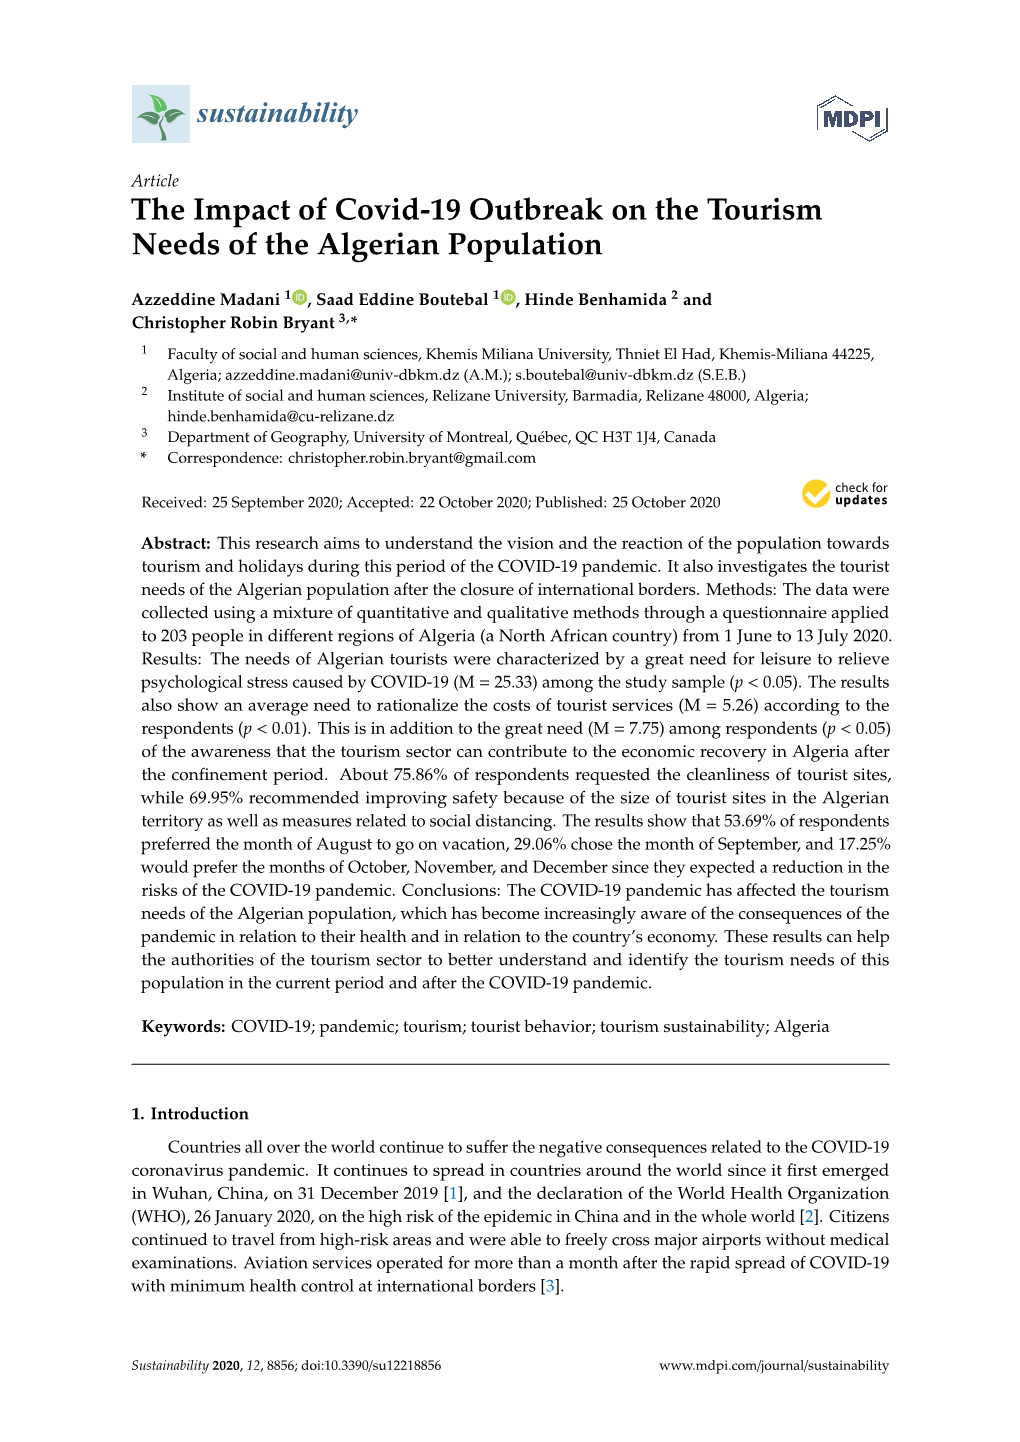 The Impact of Covid-19 Outbreak on the Tourism Needs of the Algerian Population